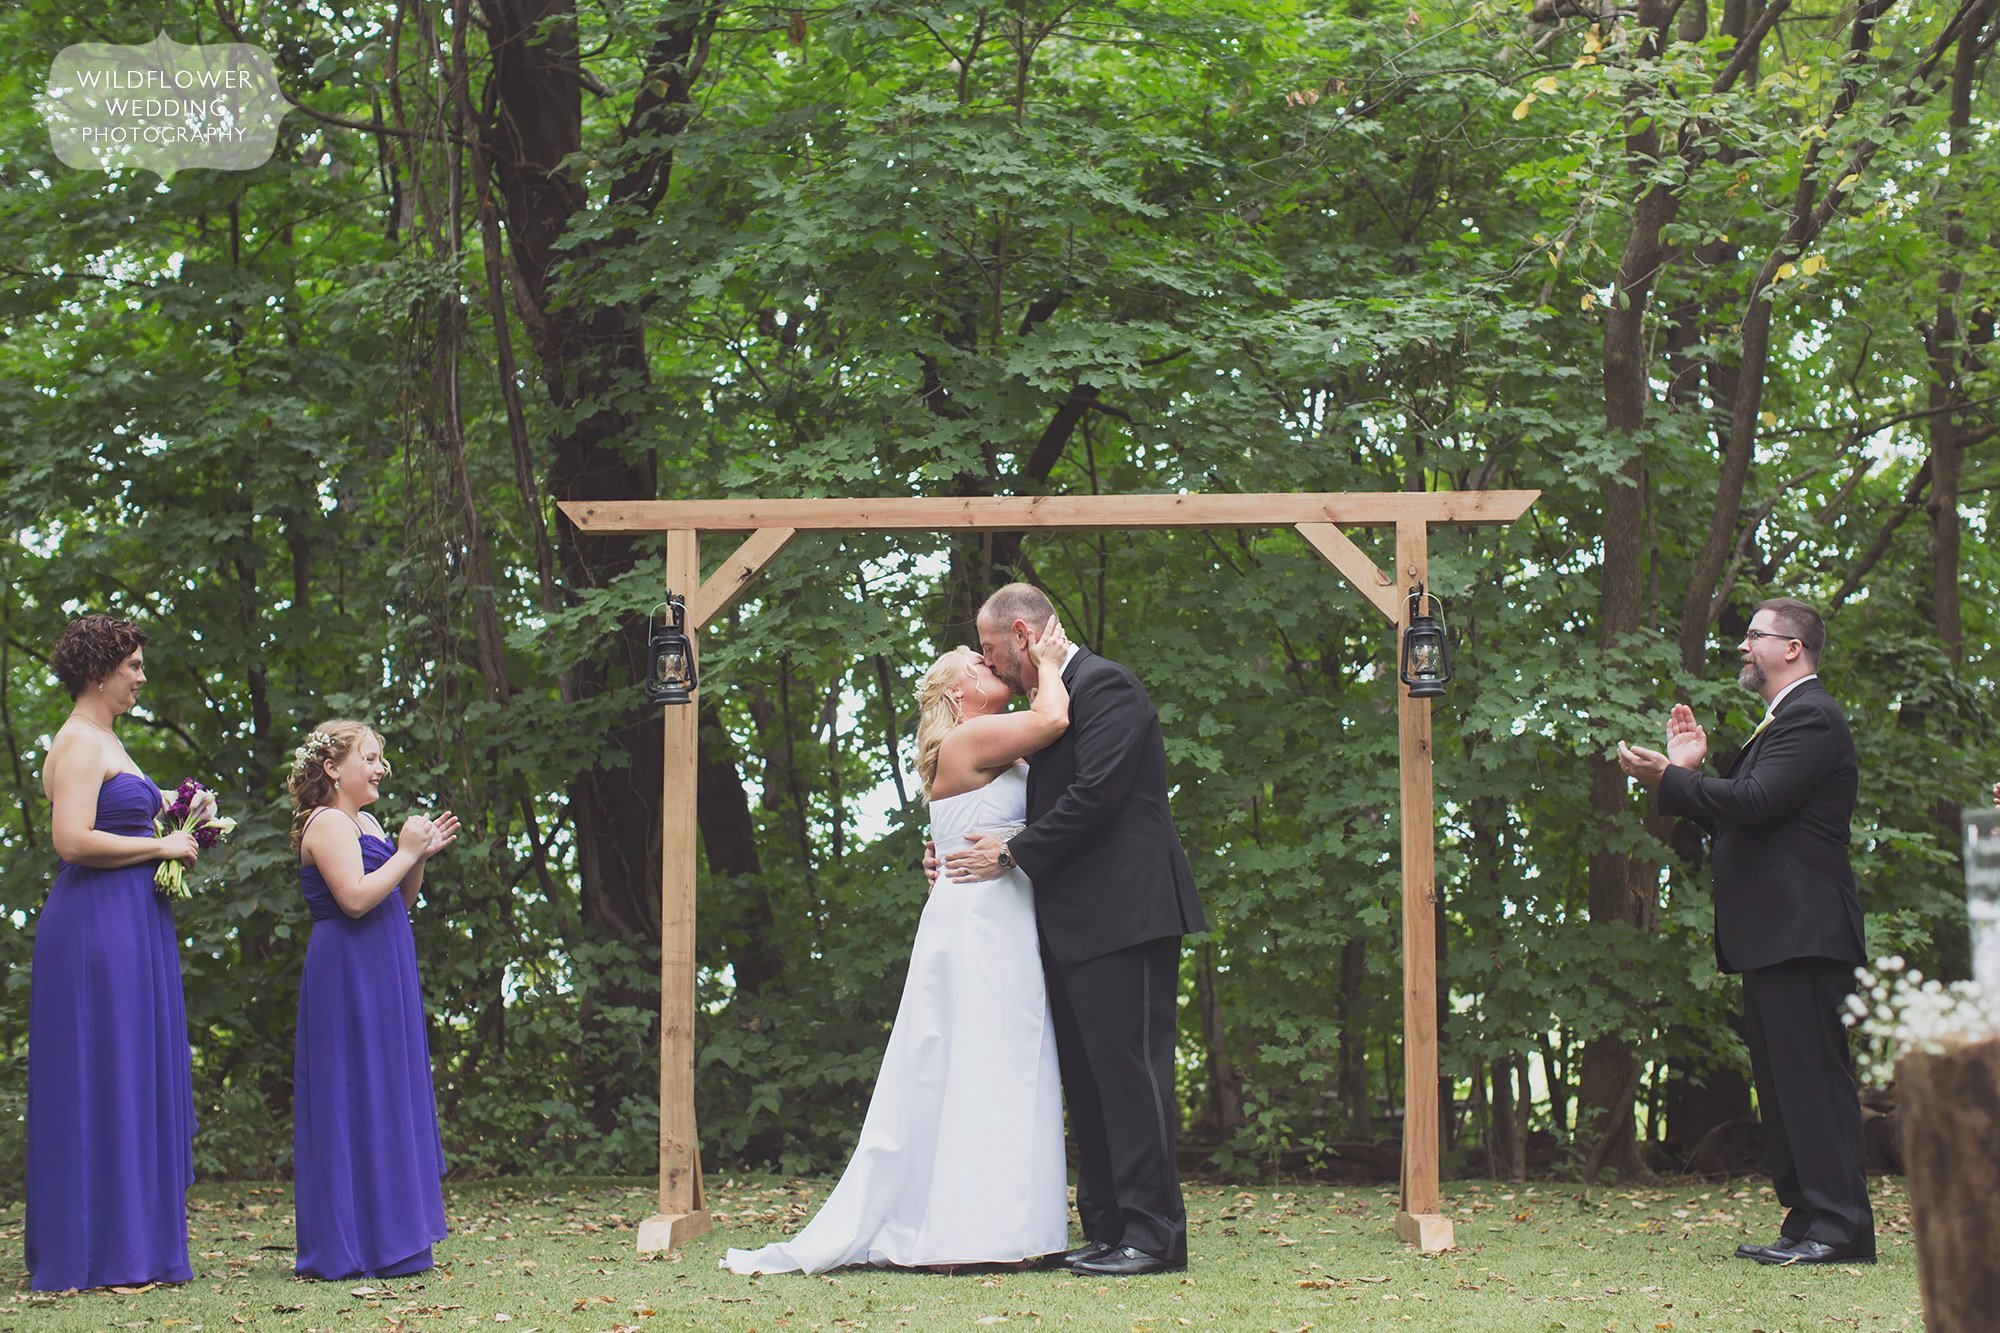 The bride and groom kiss during their outdoor ceremony at Schwinn Barn.